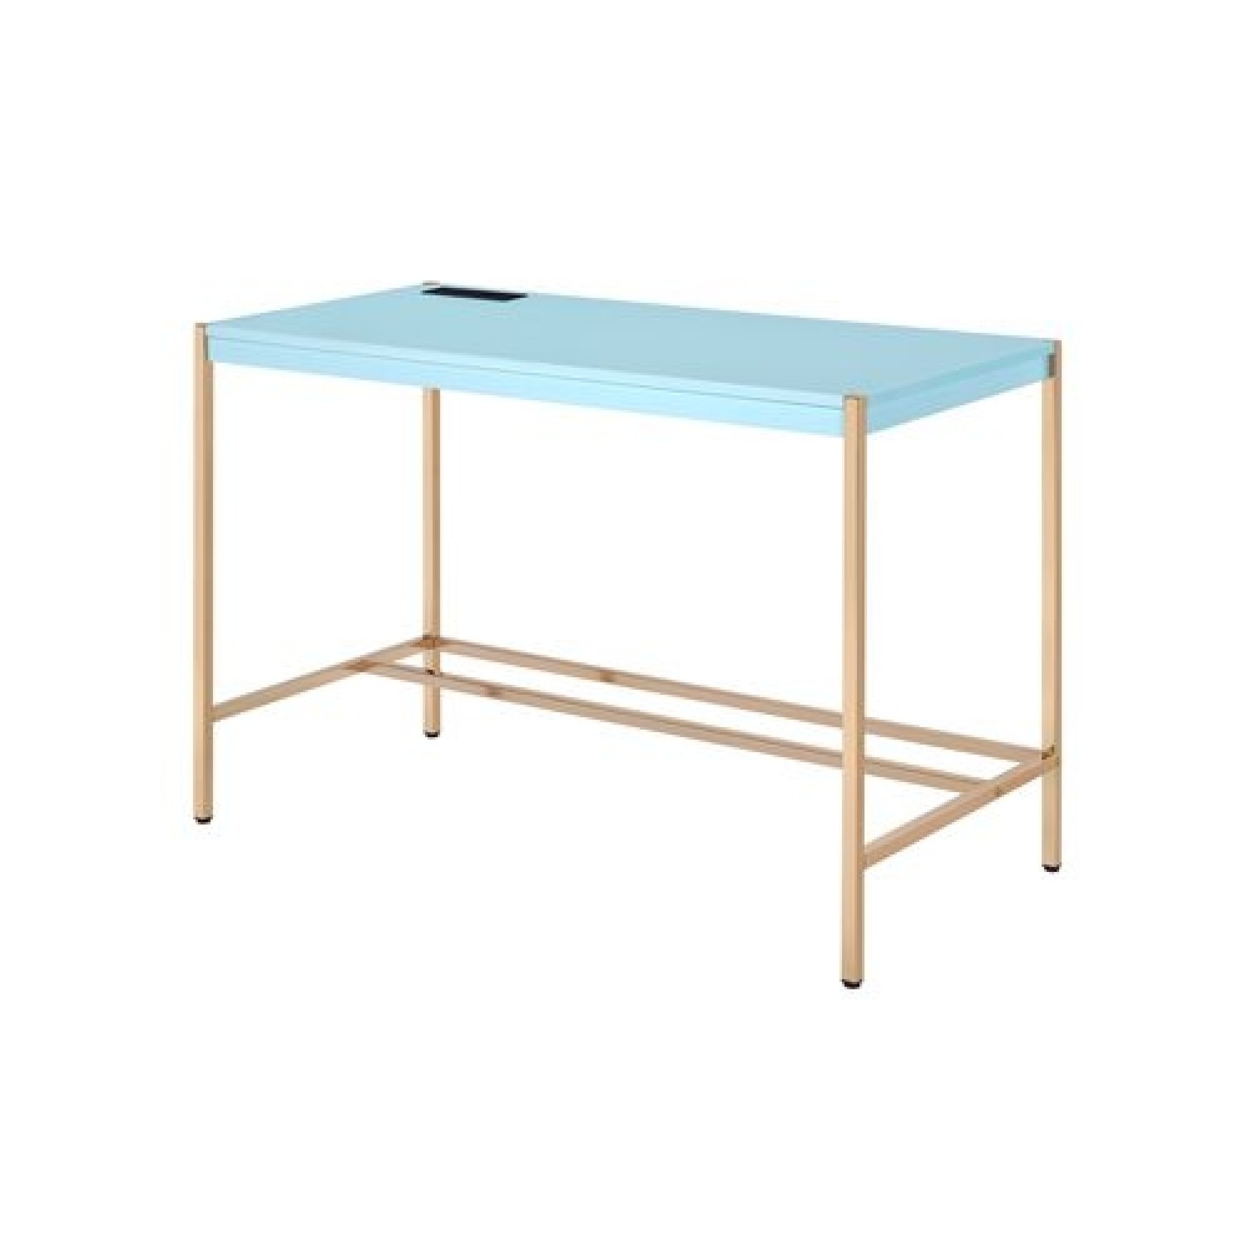 Writing Desk With USB Dock And Metal Legs, Sky Blue And Gold- Saltoro Sherpi